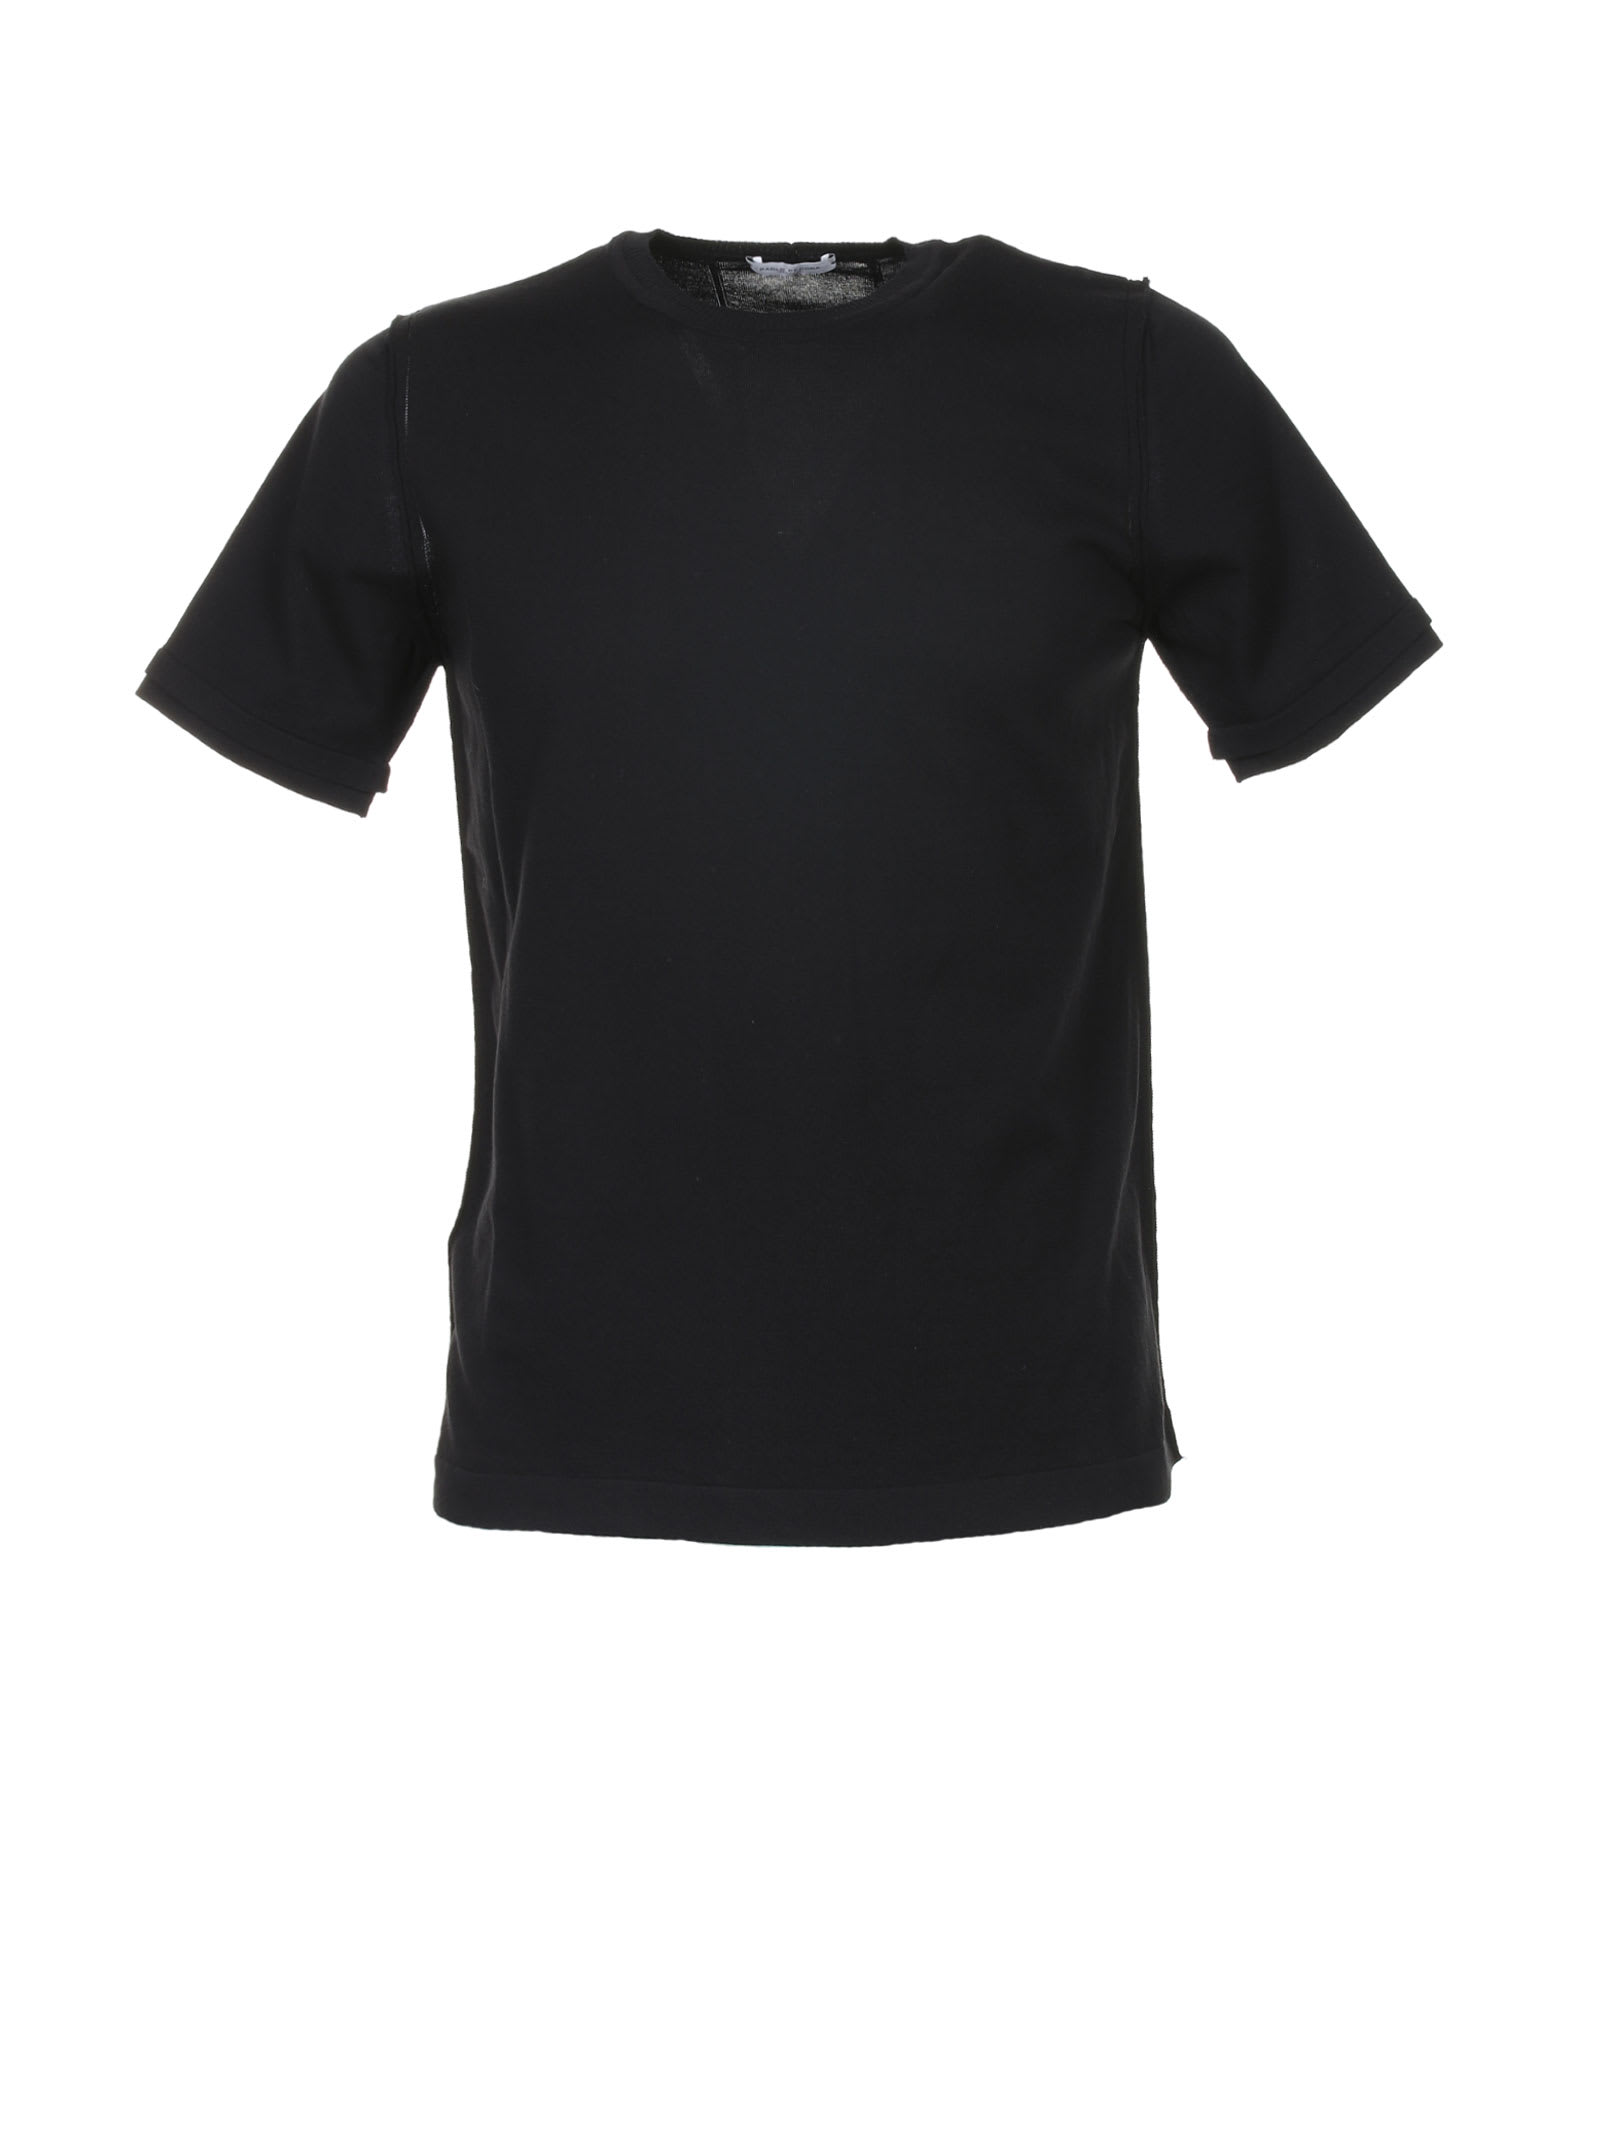 PAOLO PECORA T-SHIRT IN BLACK COTTON,A026 76169000